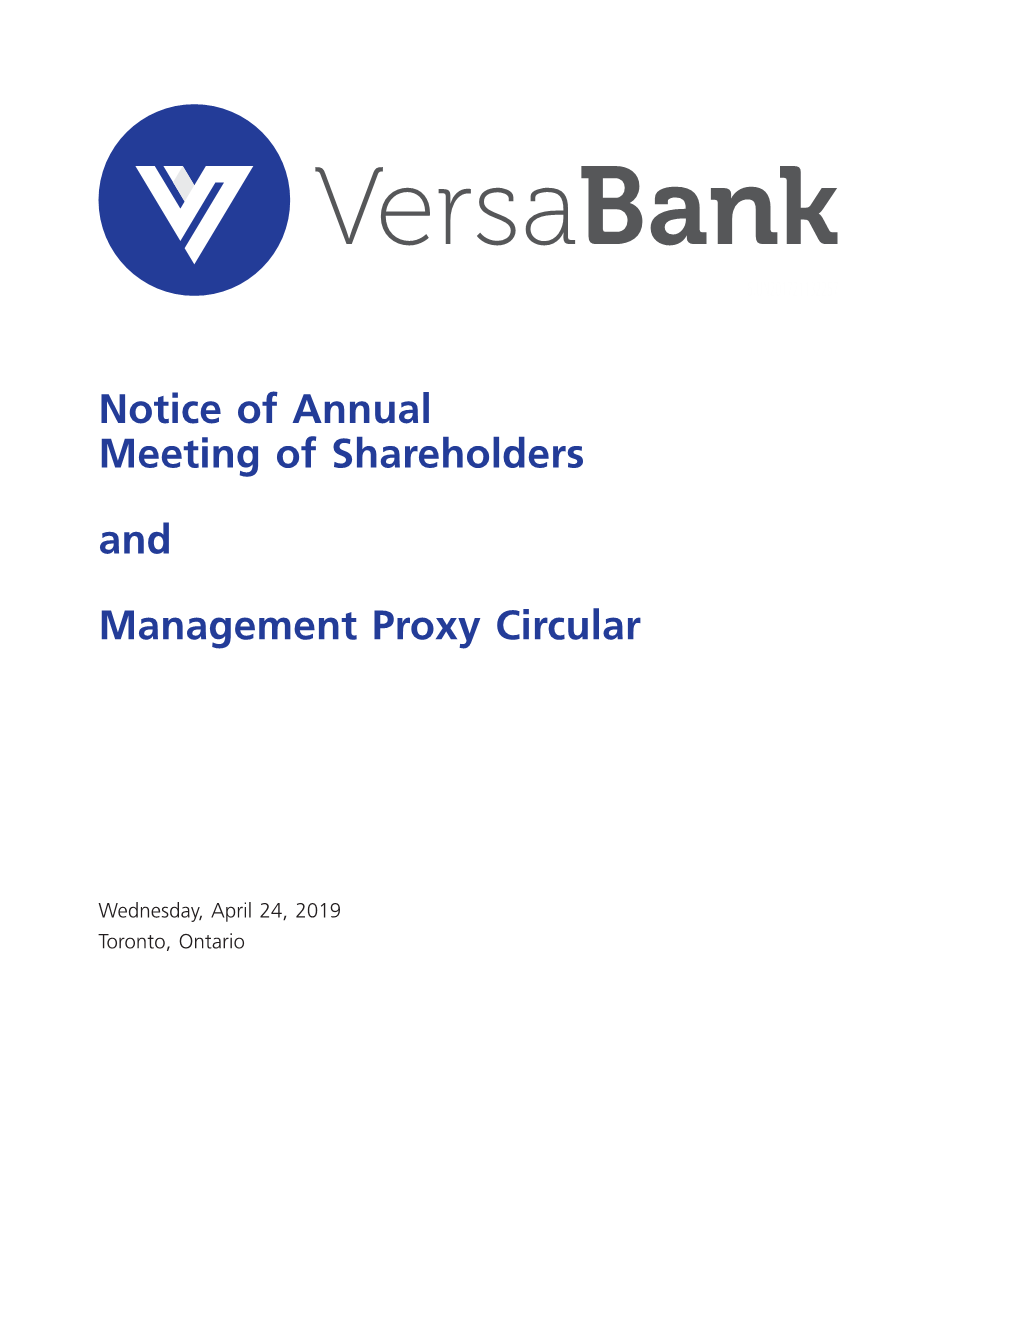 Notice of Annual Meeting of Shareholders And